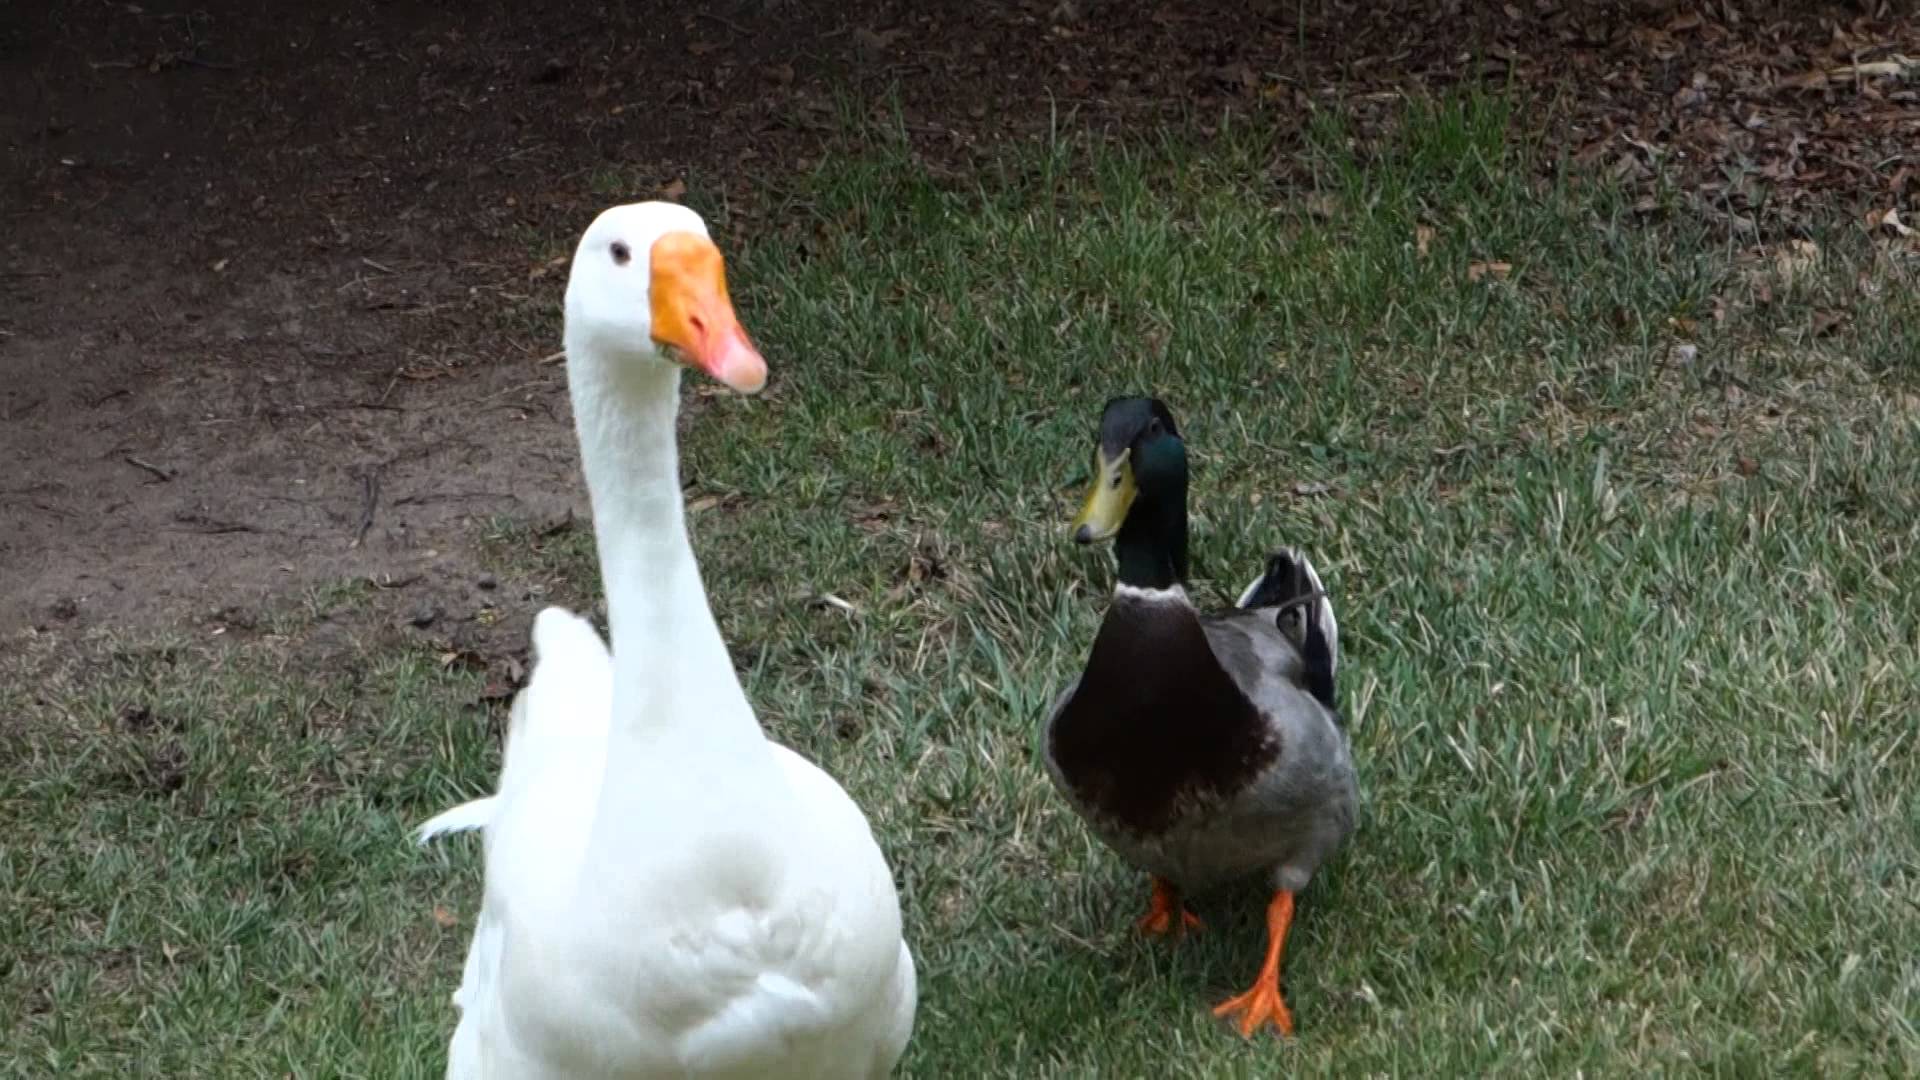 Unlikely Animal Friends a Goose and Duck Hang Out and Talk - YouTube